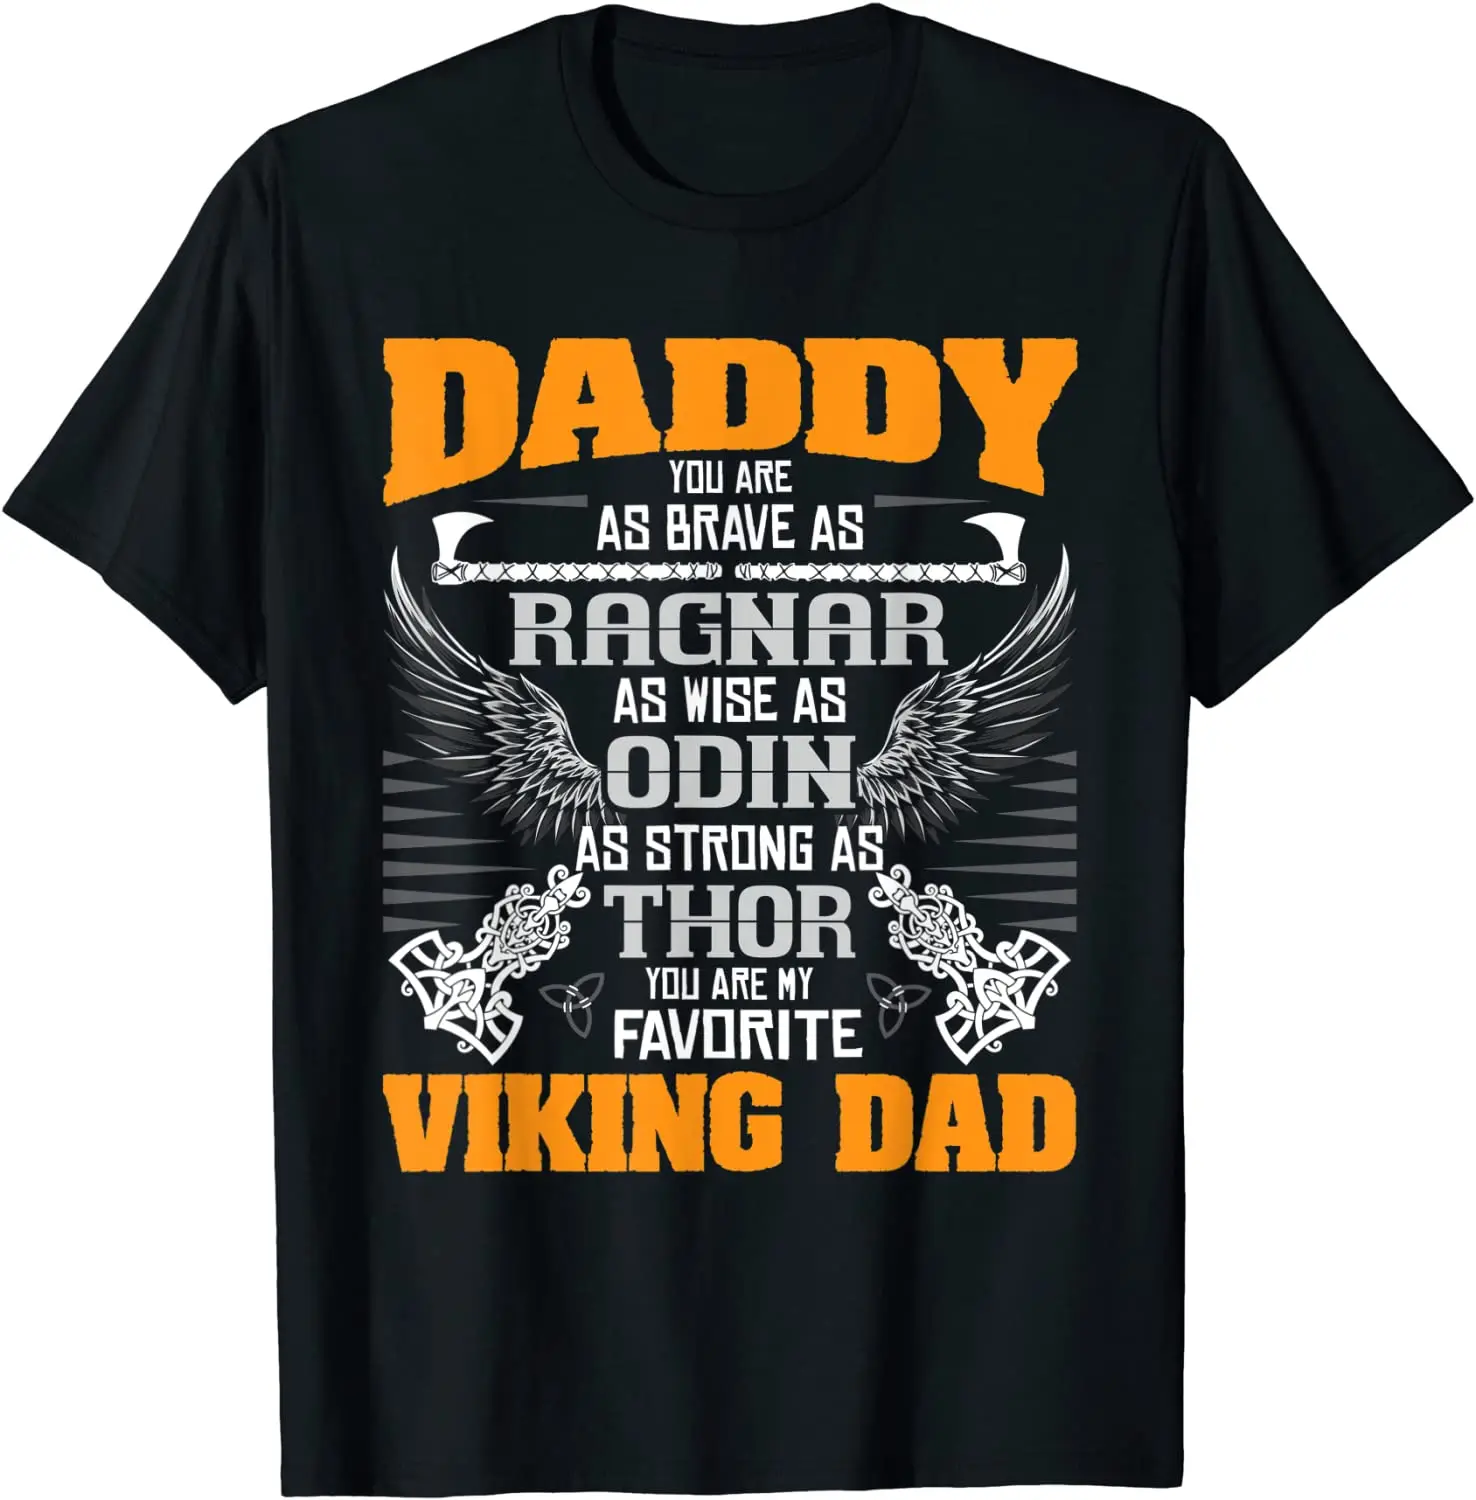 

Daddy Is My Favorite Viking Dad - Viking Norse Mythology T Shirt. Short Sleeve 100% Cotton Casual T-shirts Loose Top Size S-3XL